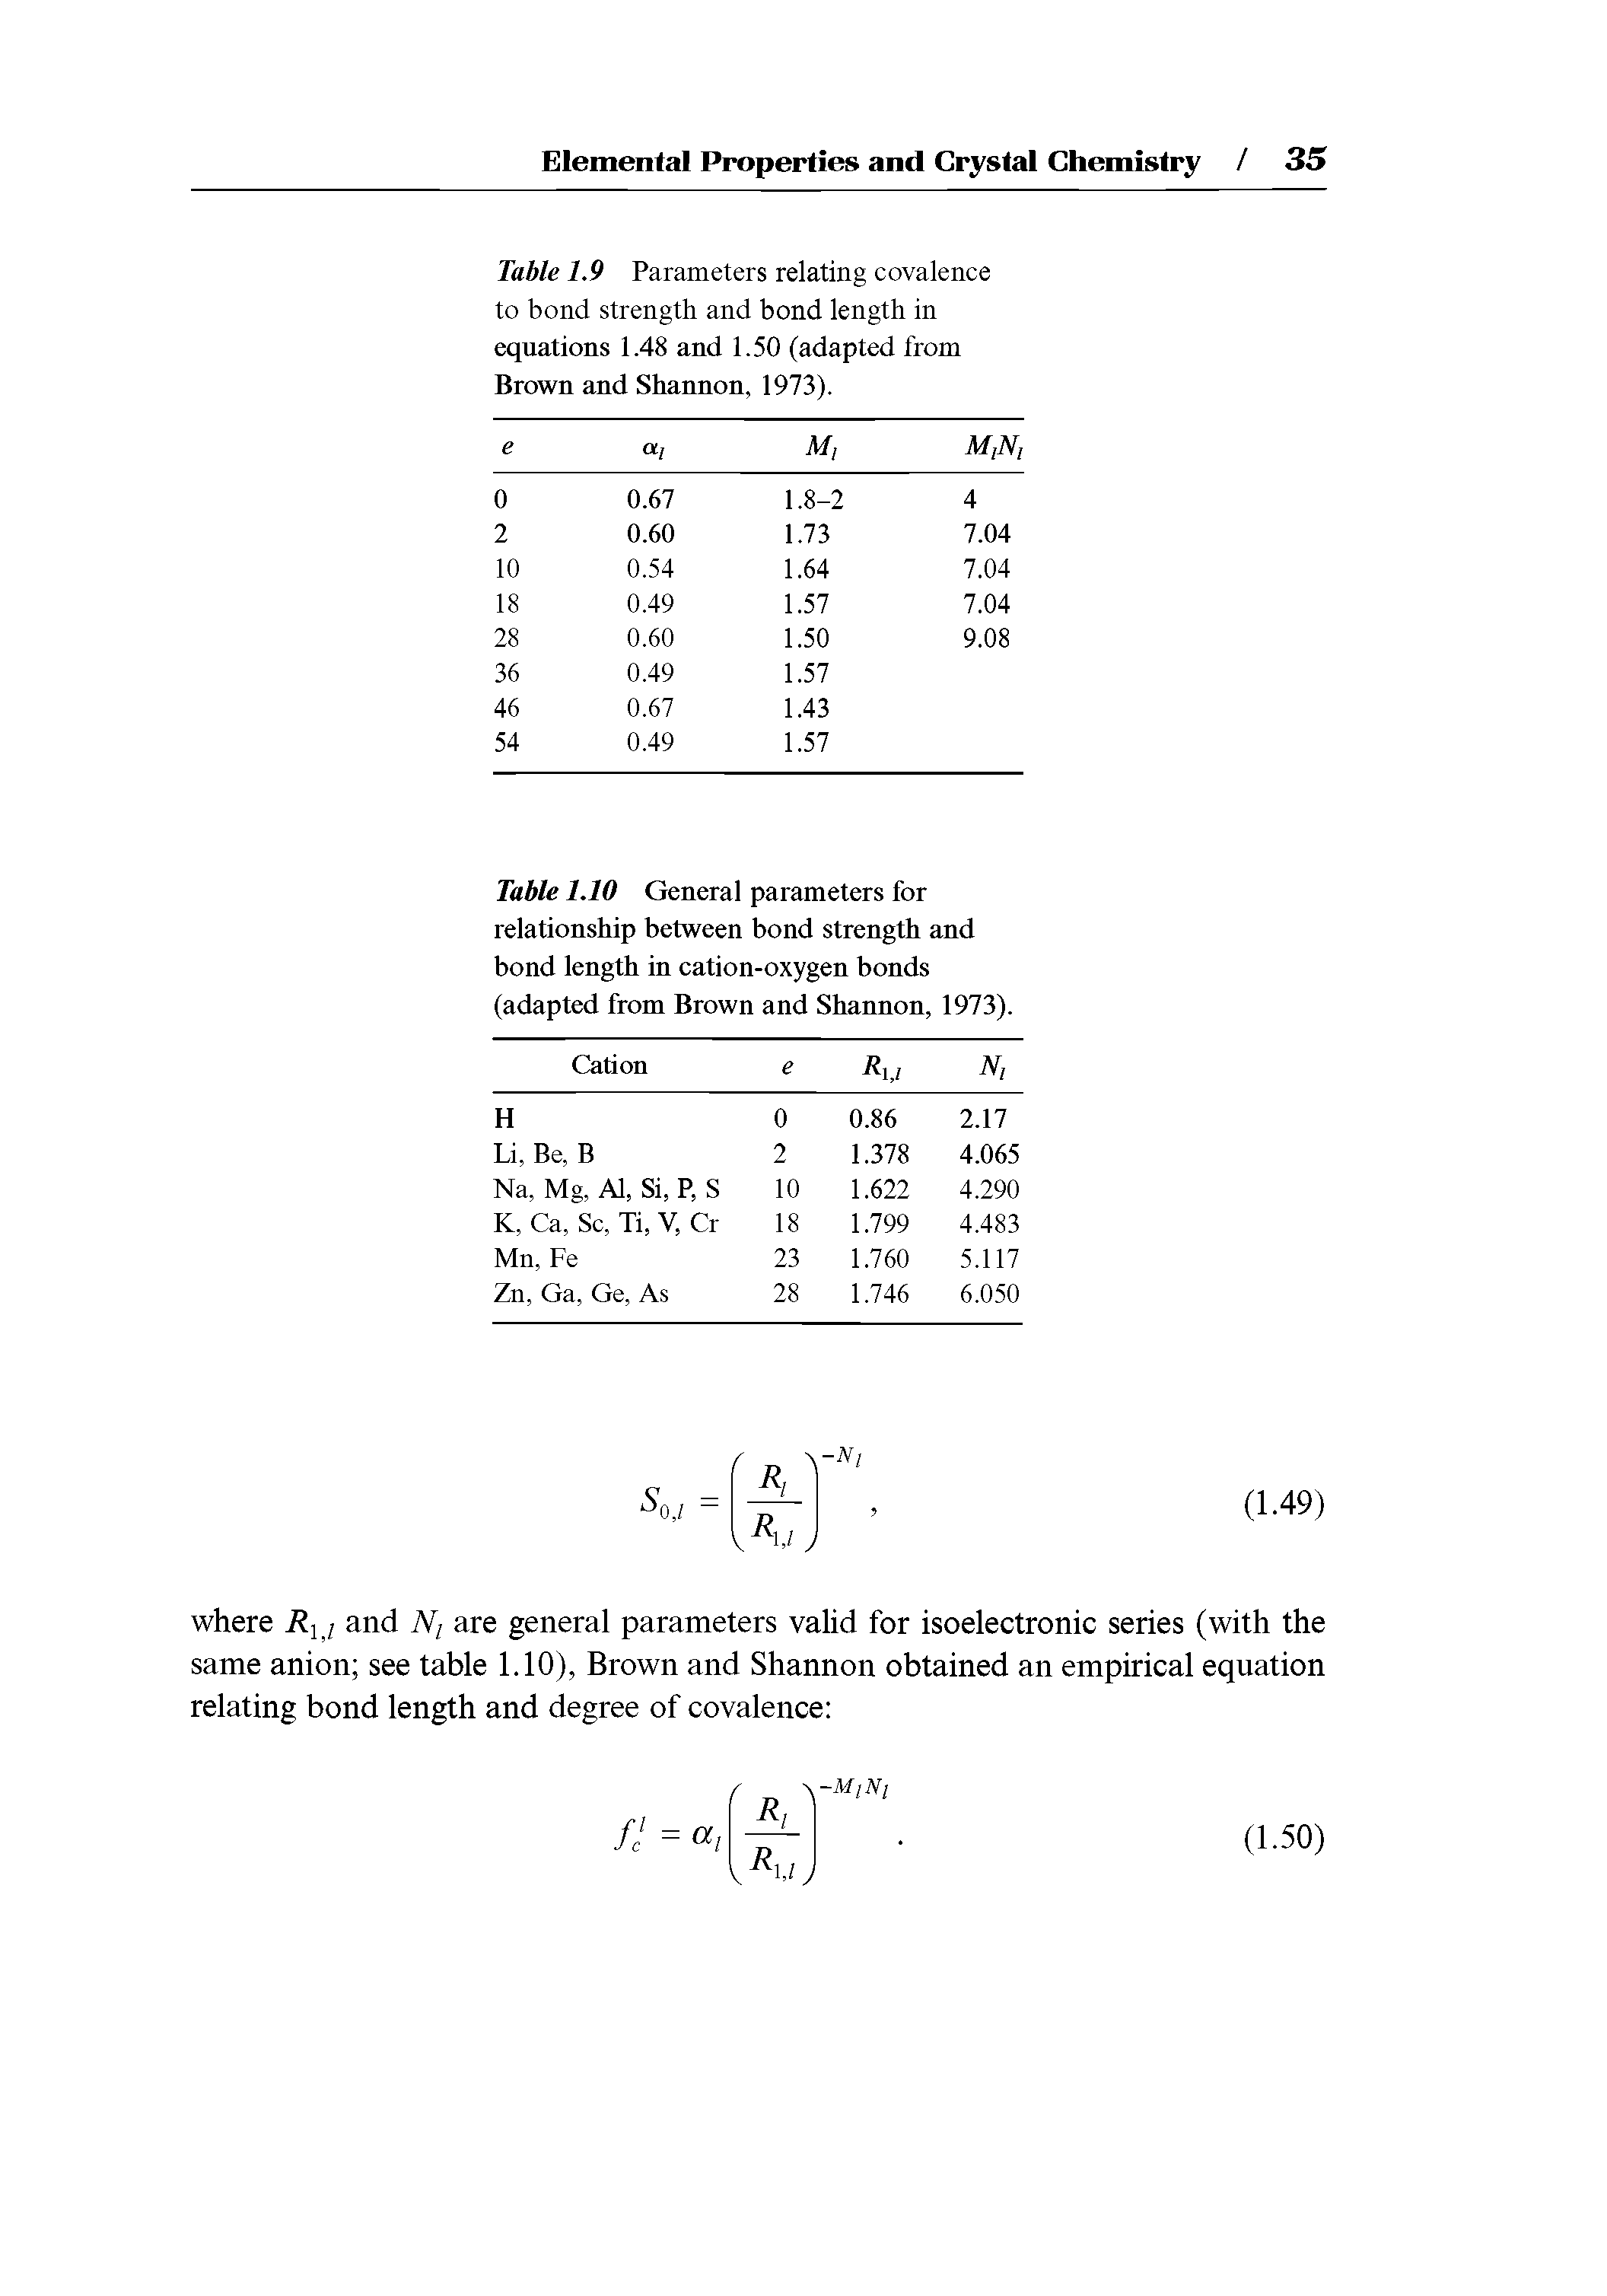 Table 1.9 Parameters relating covalence to bond strength and bond length in equations 1.48 and 1.50 (adapted from Brown and Shannon, 1973).